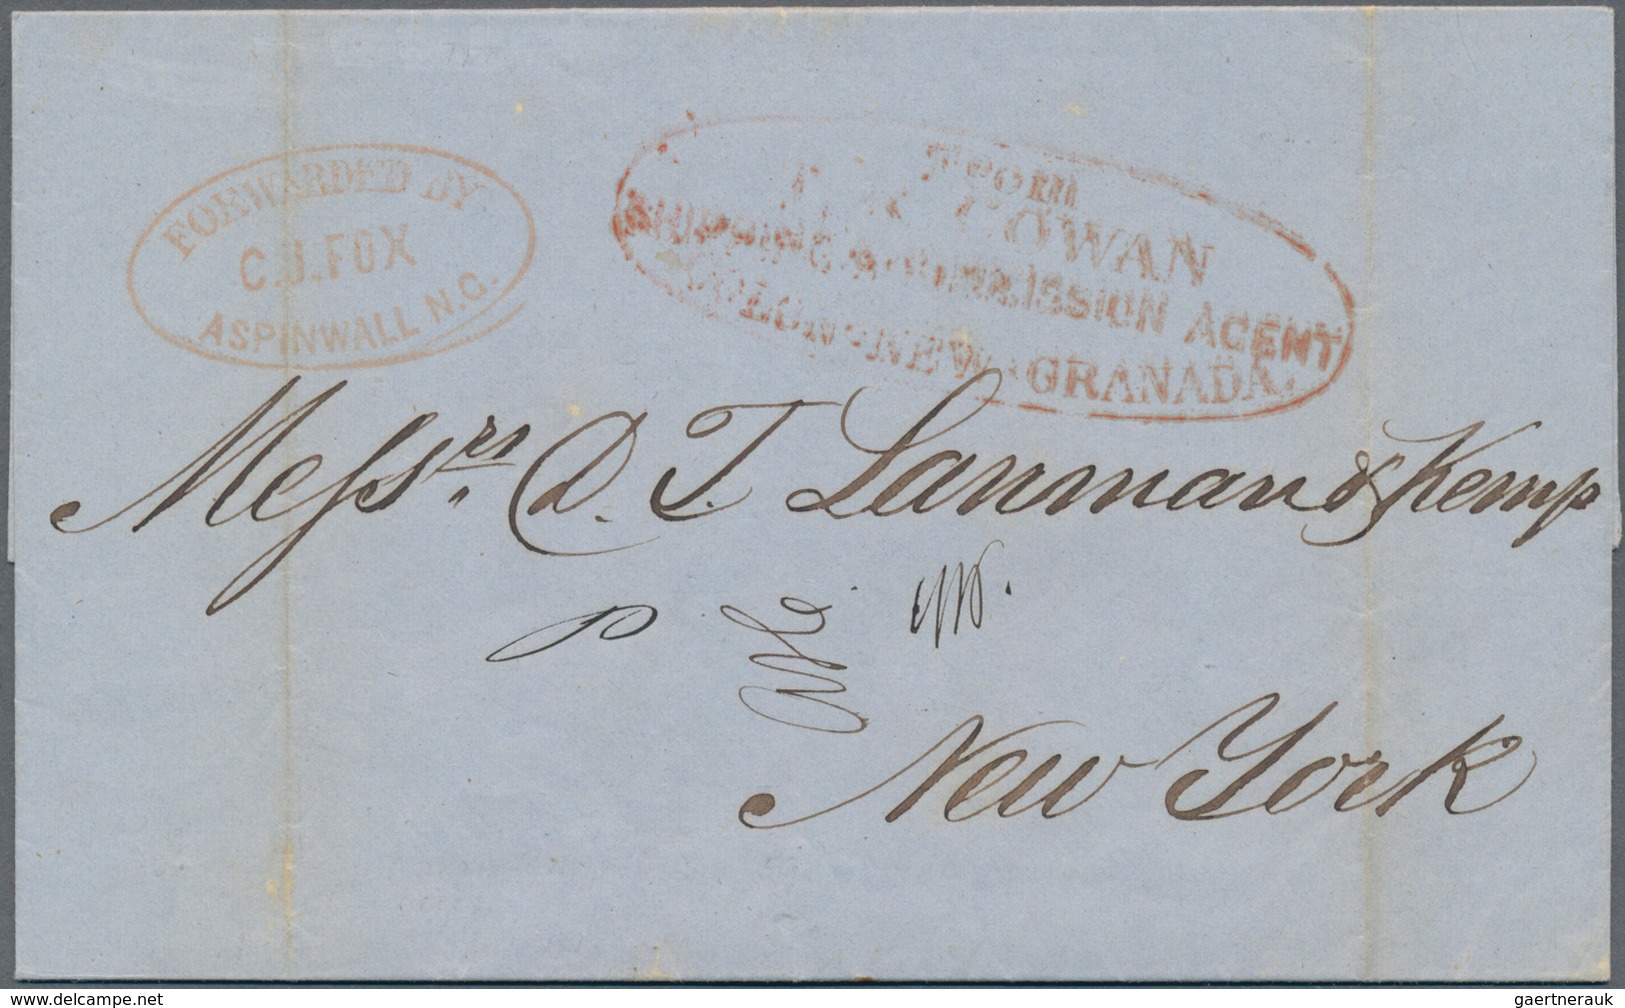 Panama: 1859, Doubly Forwarded Letter From Cartagena, Colombia To New York, Forwarded In Colon (Pana - Panama